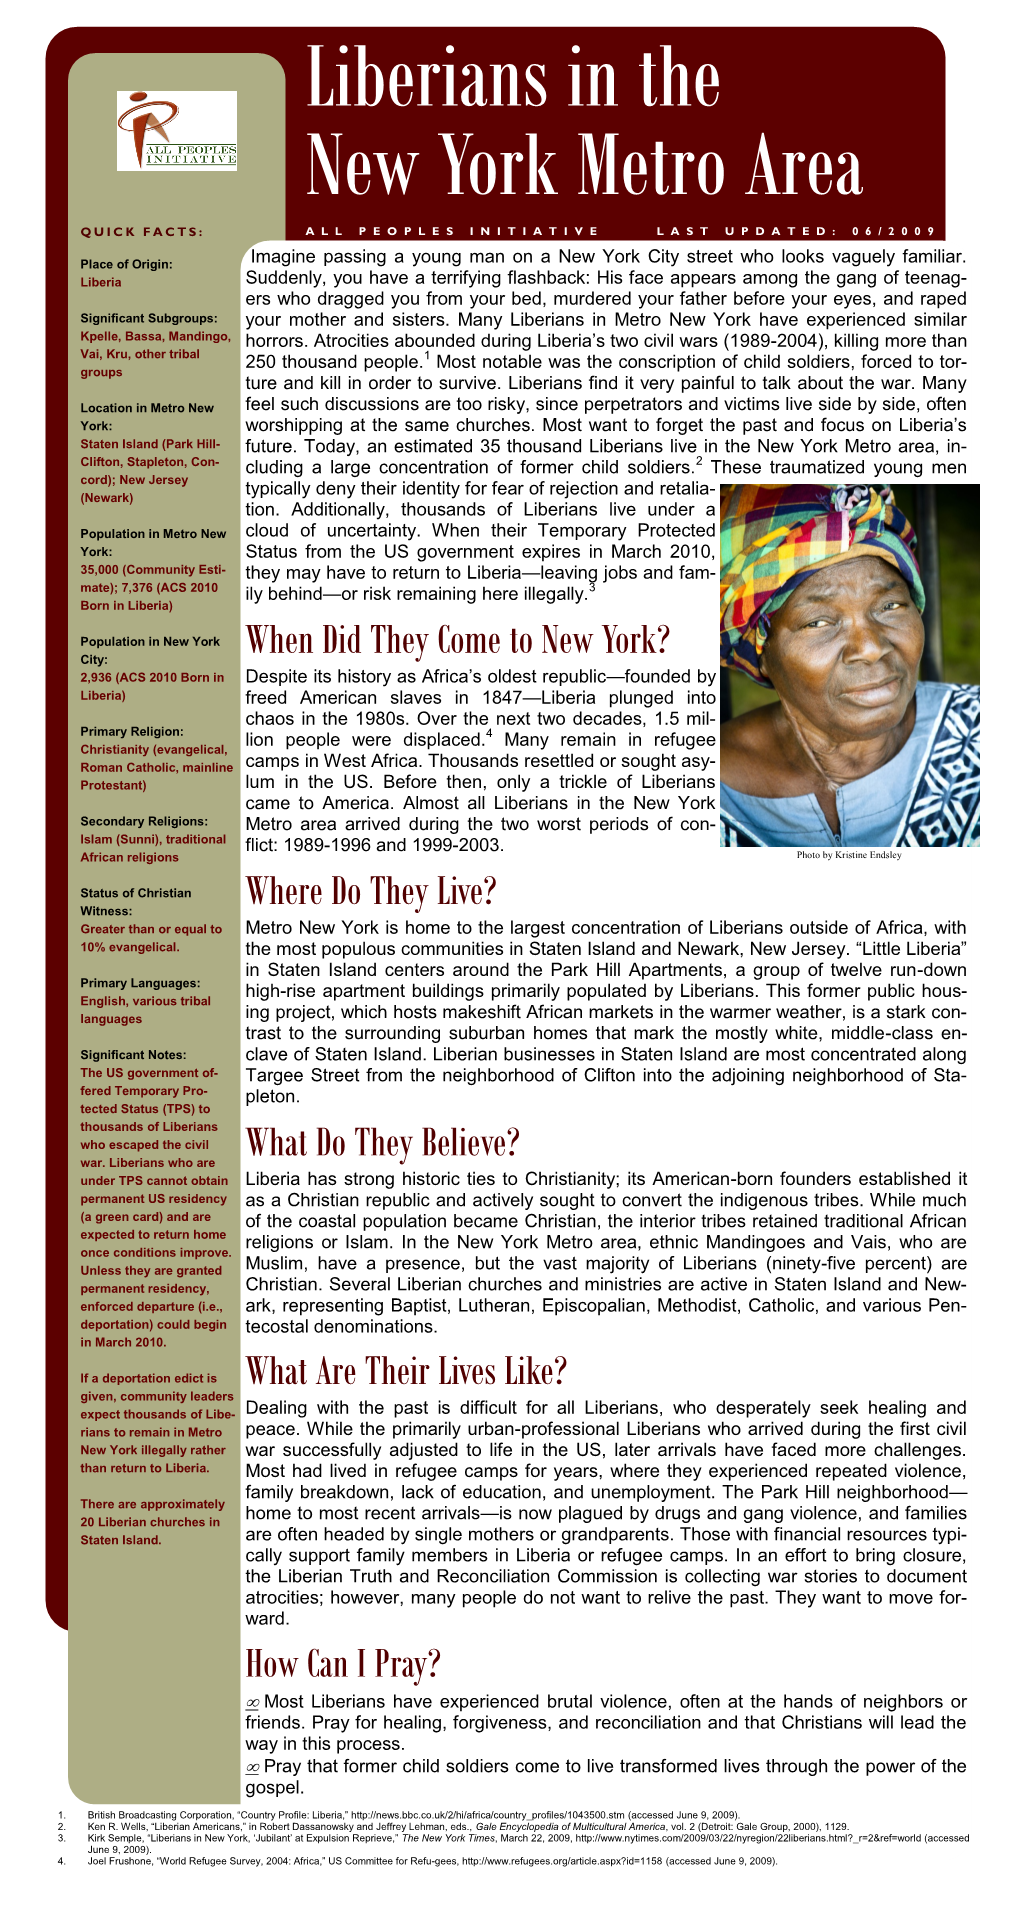 Liberians in the New York Metro Area QUICK FACTS: ALL PEOPLES INITIATI VE LAST UPDATED: 06/2009